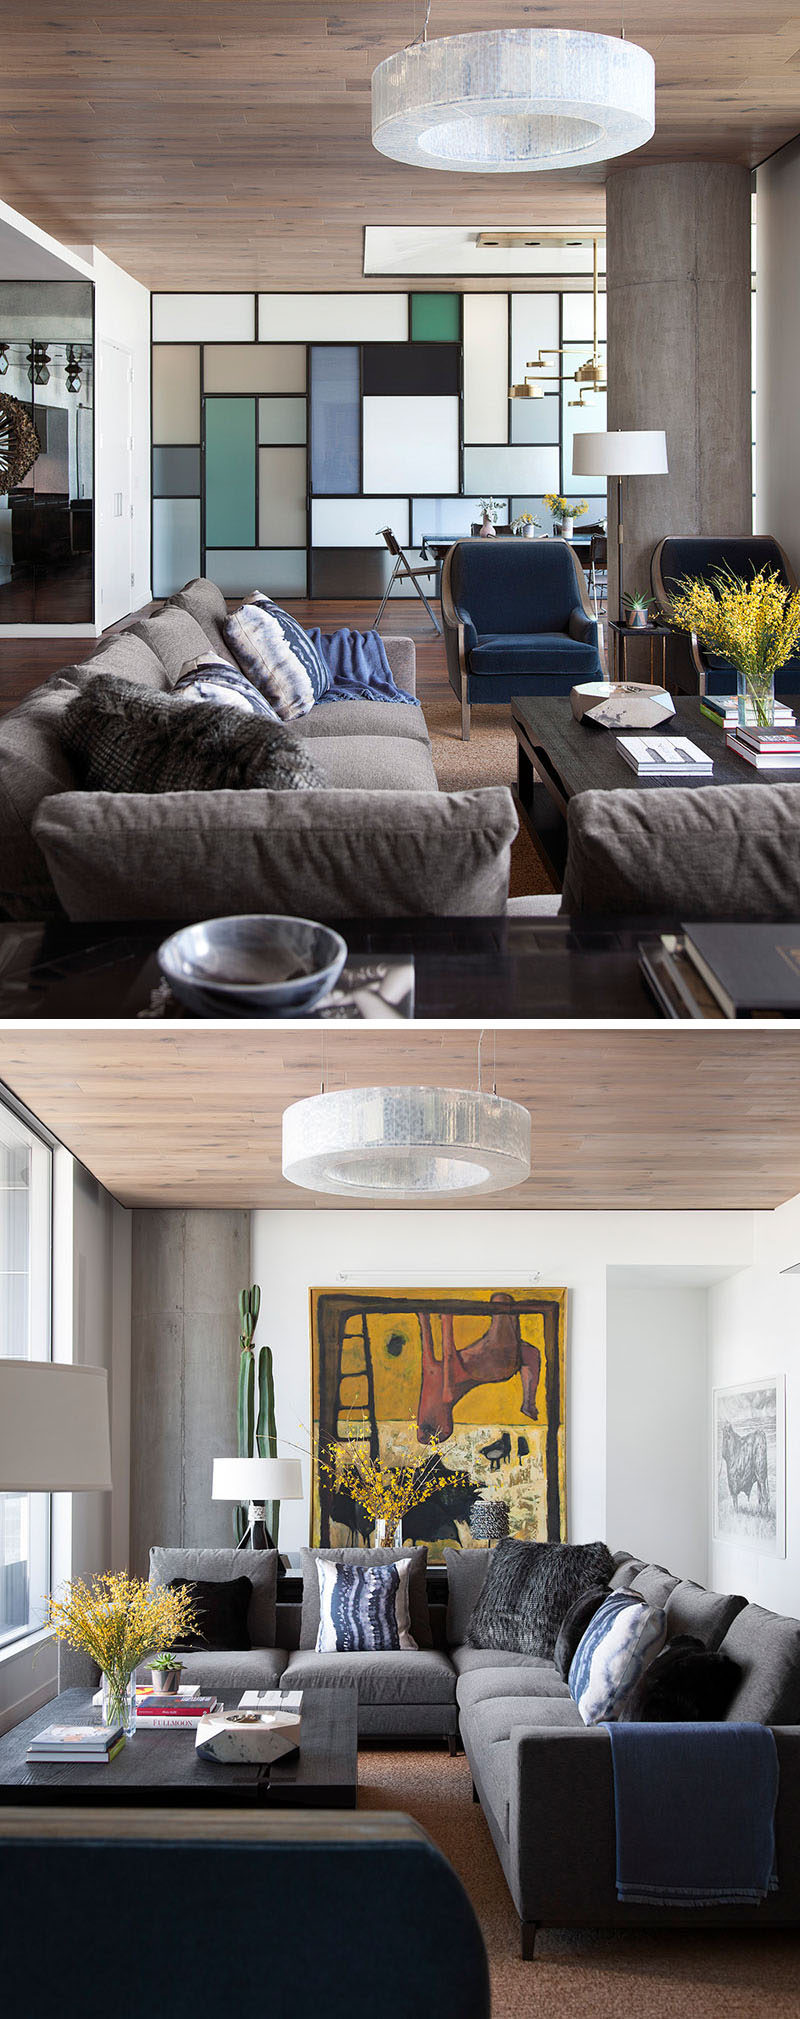 This modern living room has the furniture positioned to take advantage of the views, while the wood ceiling and floor add a sense of warmth to the apartment. #ApartmentDesign #LivingRoom #WoodCeiling